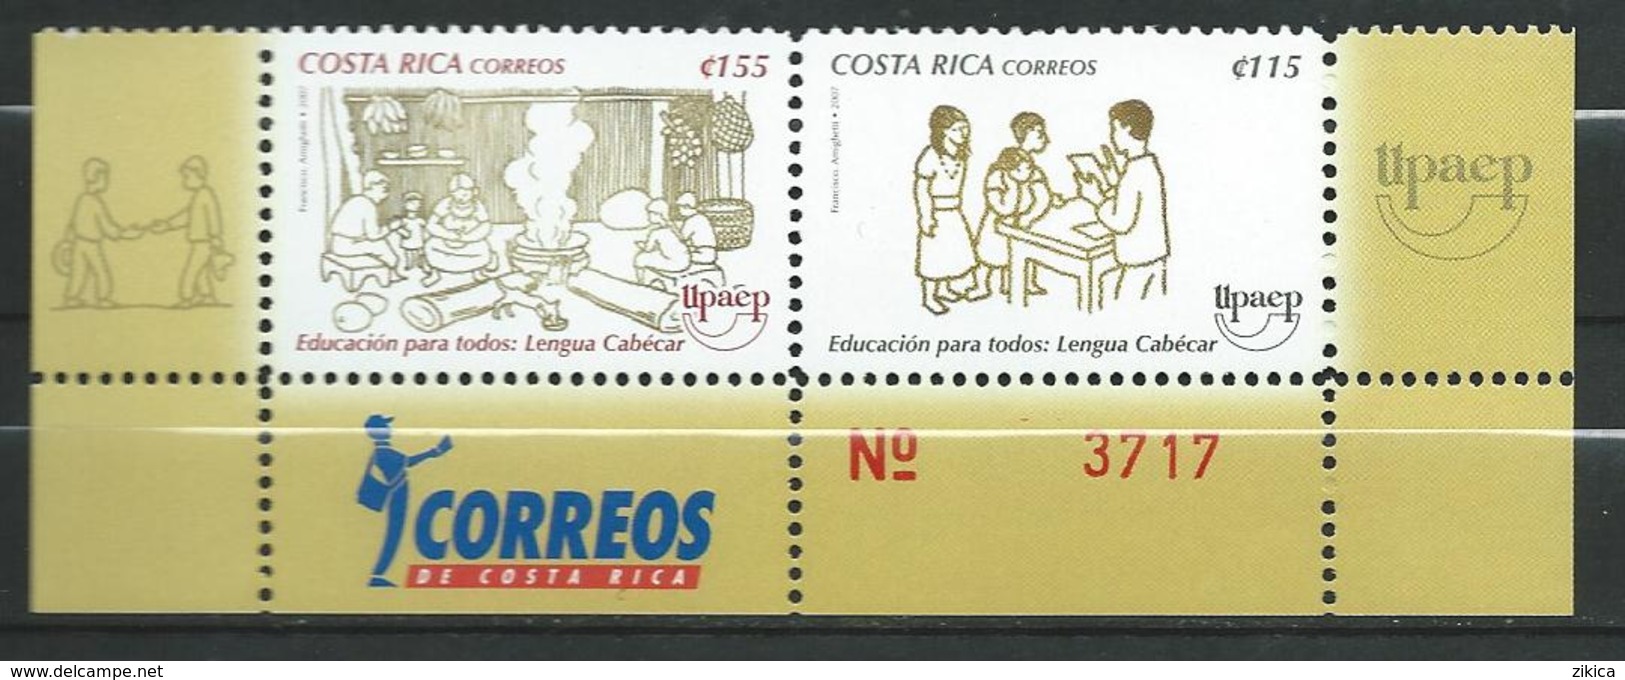 Costa Rica 2007 America UPAEP - Education For All.MNH - Costa Rica